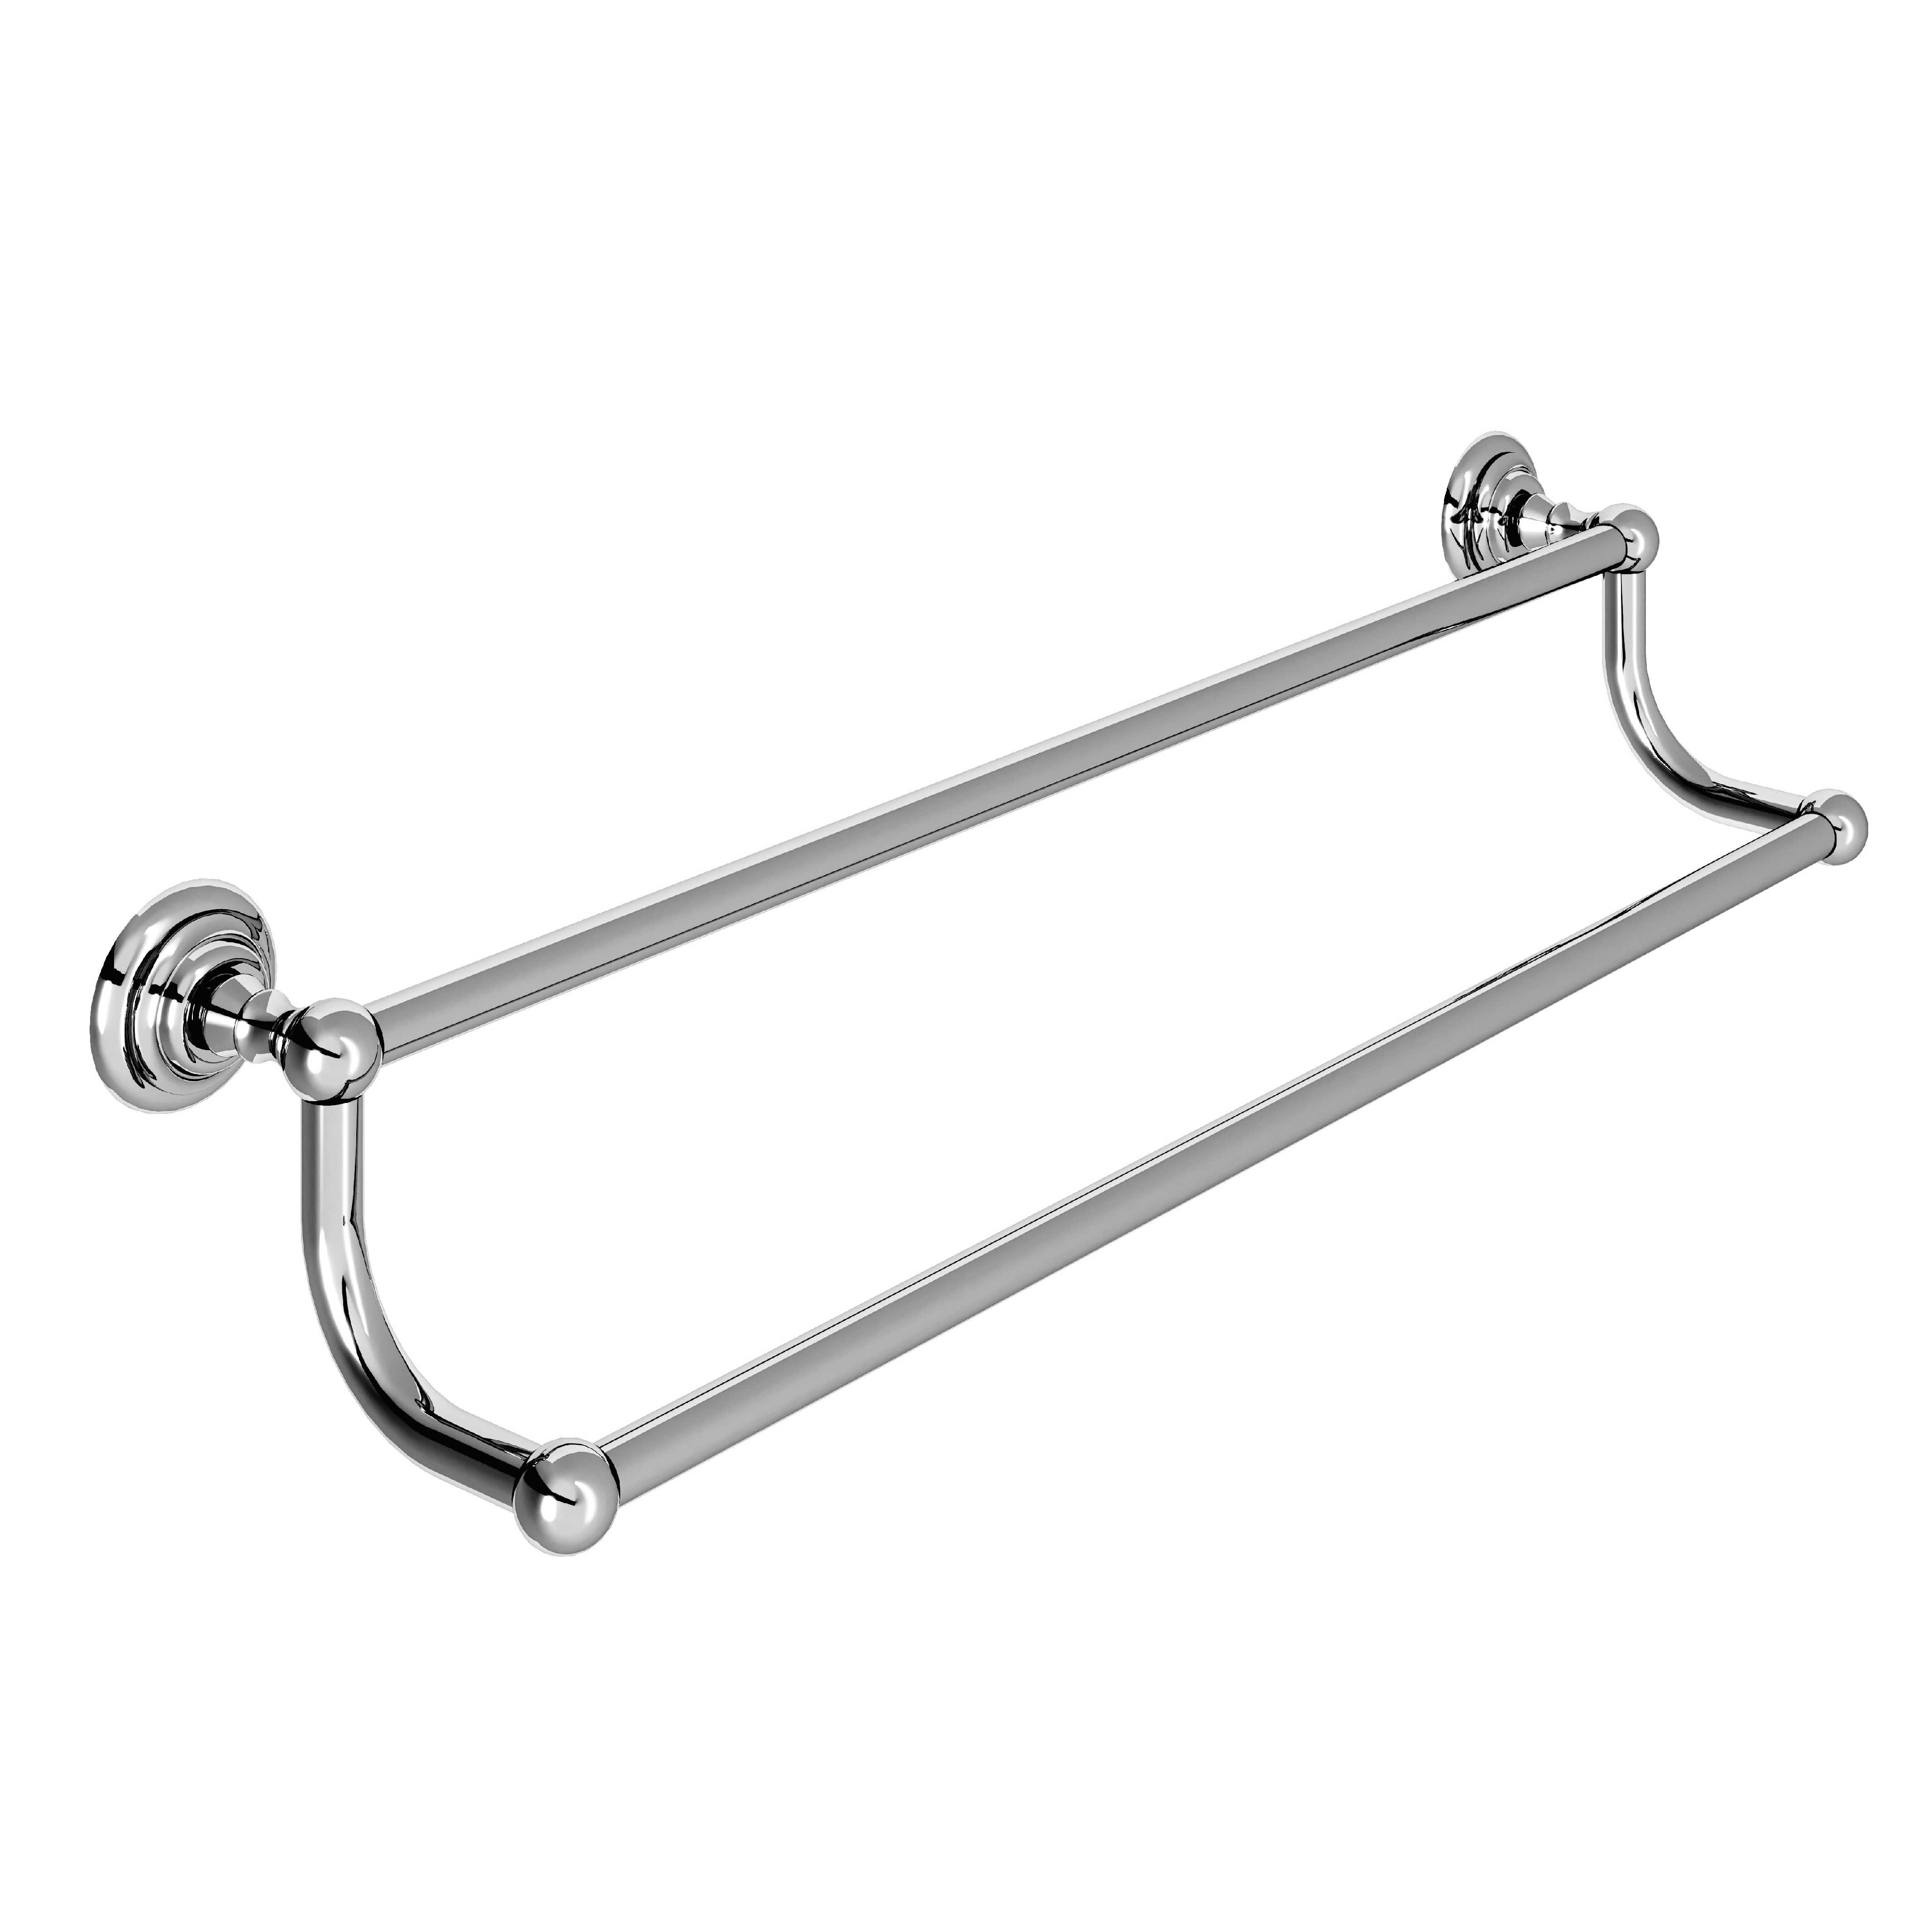 M04-509 Wall mounted double towel bar